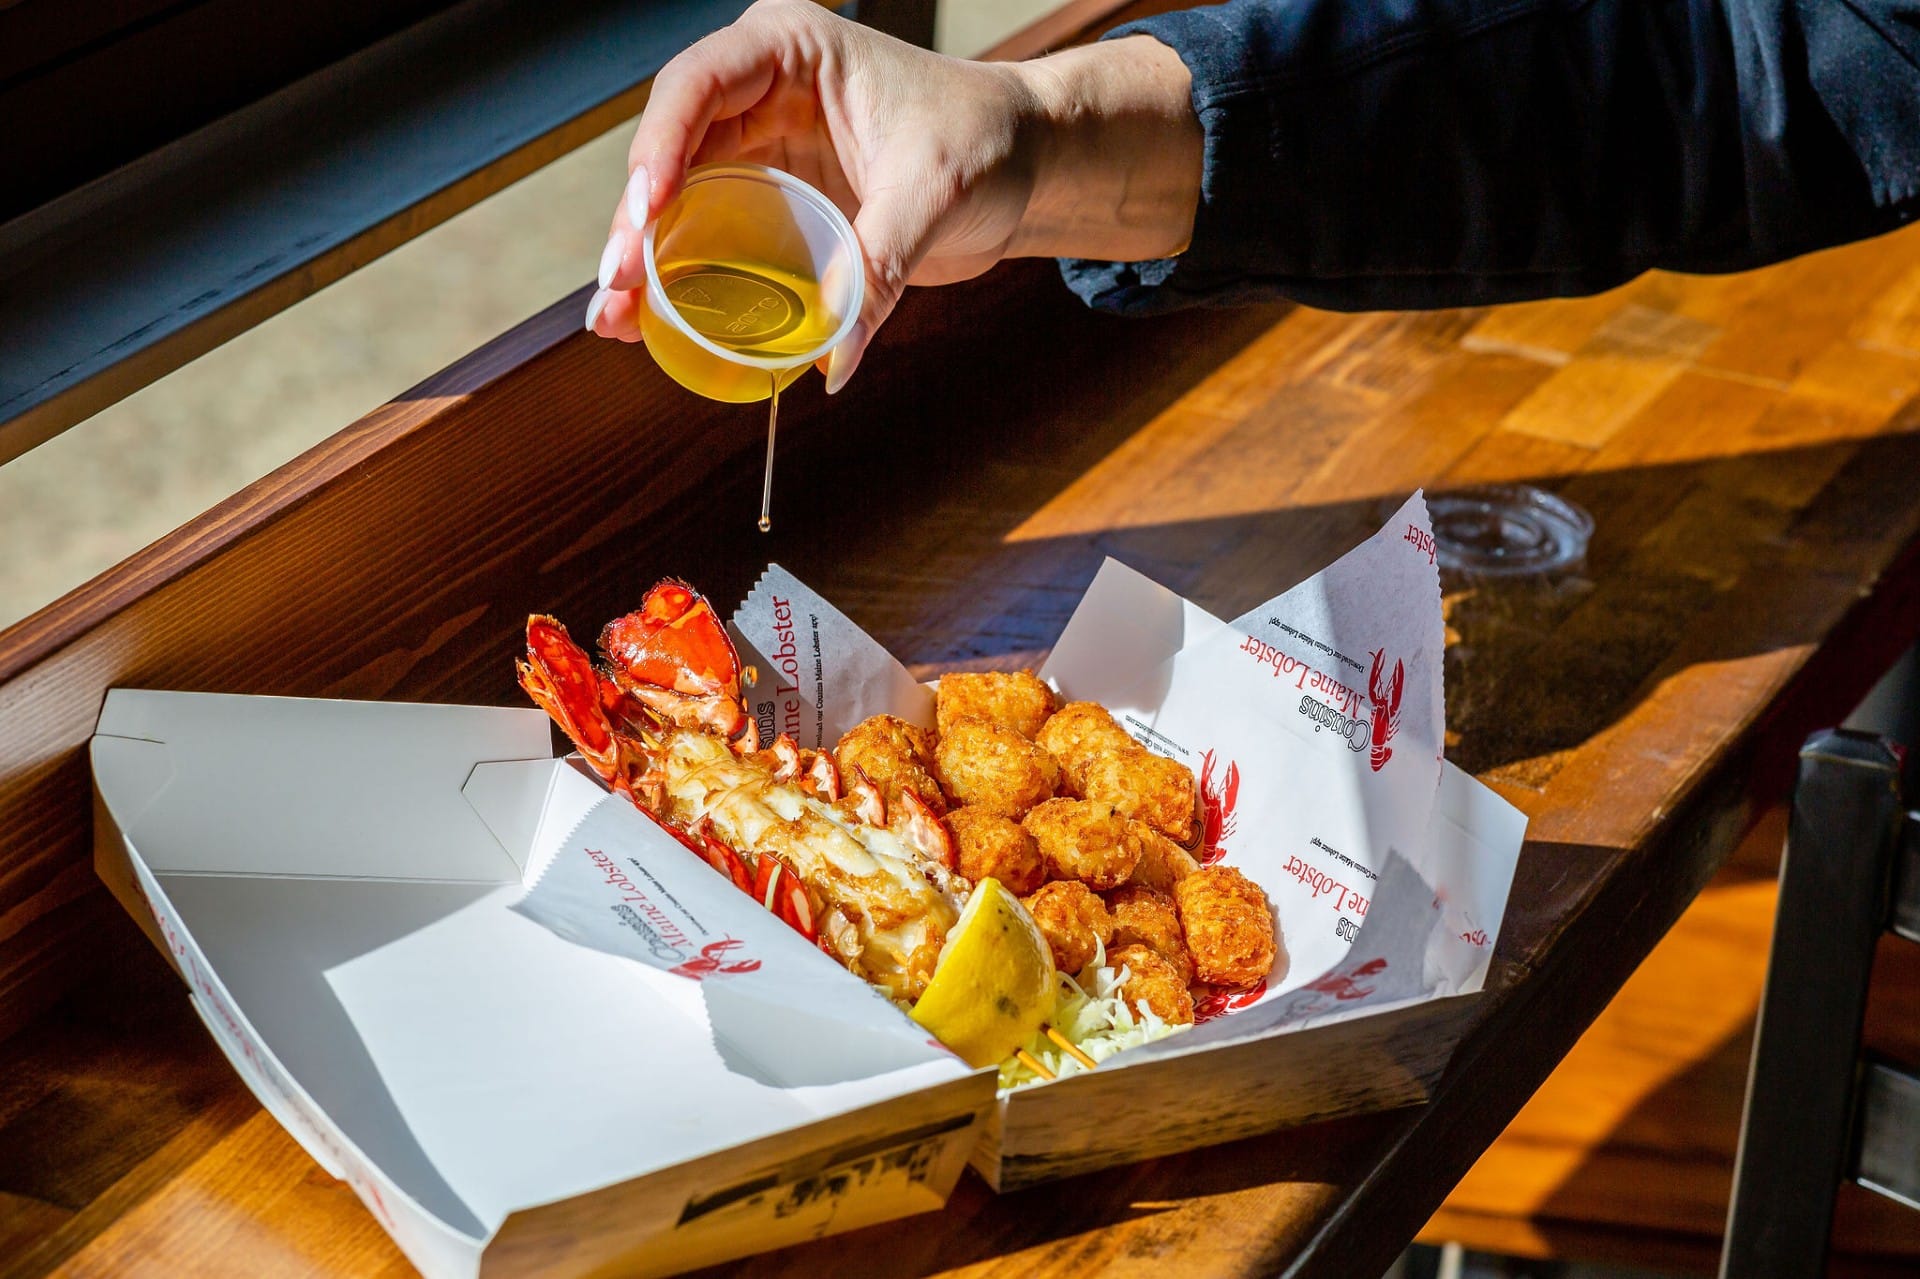 A person pours melted butter over a meal consisting of lobster, fried shrimp, and a lemon wedge, served in a white takeout container on a wooden table.